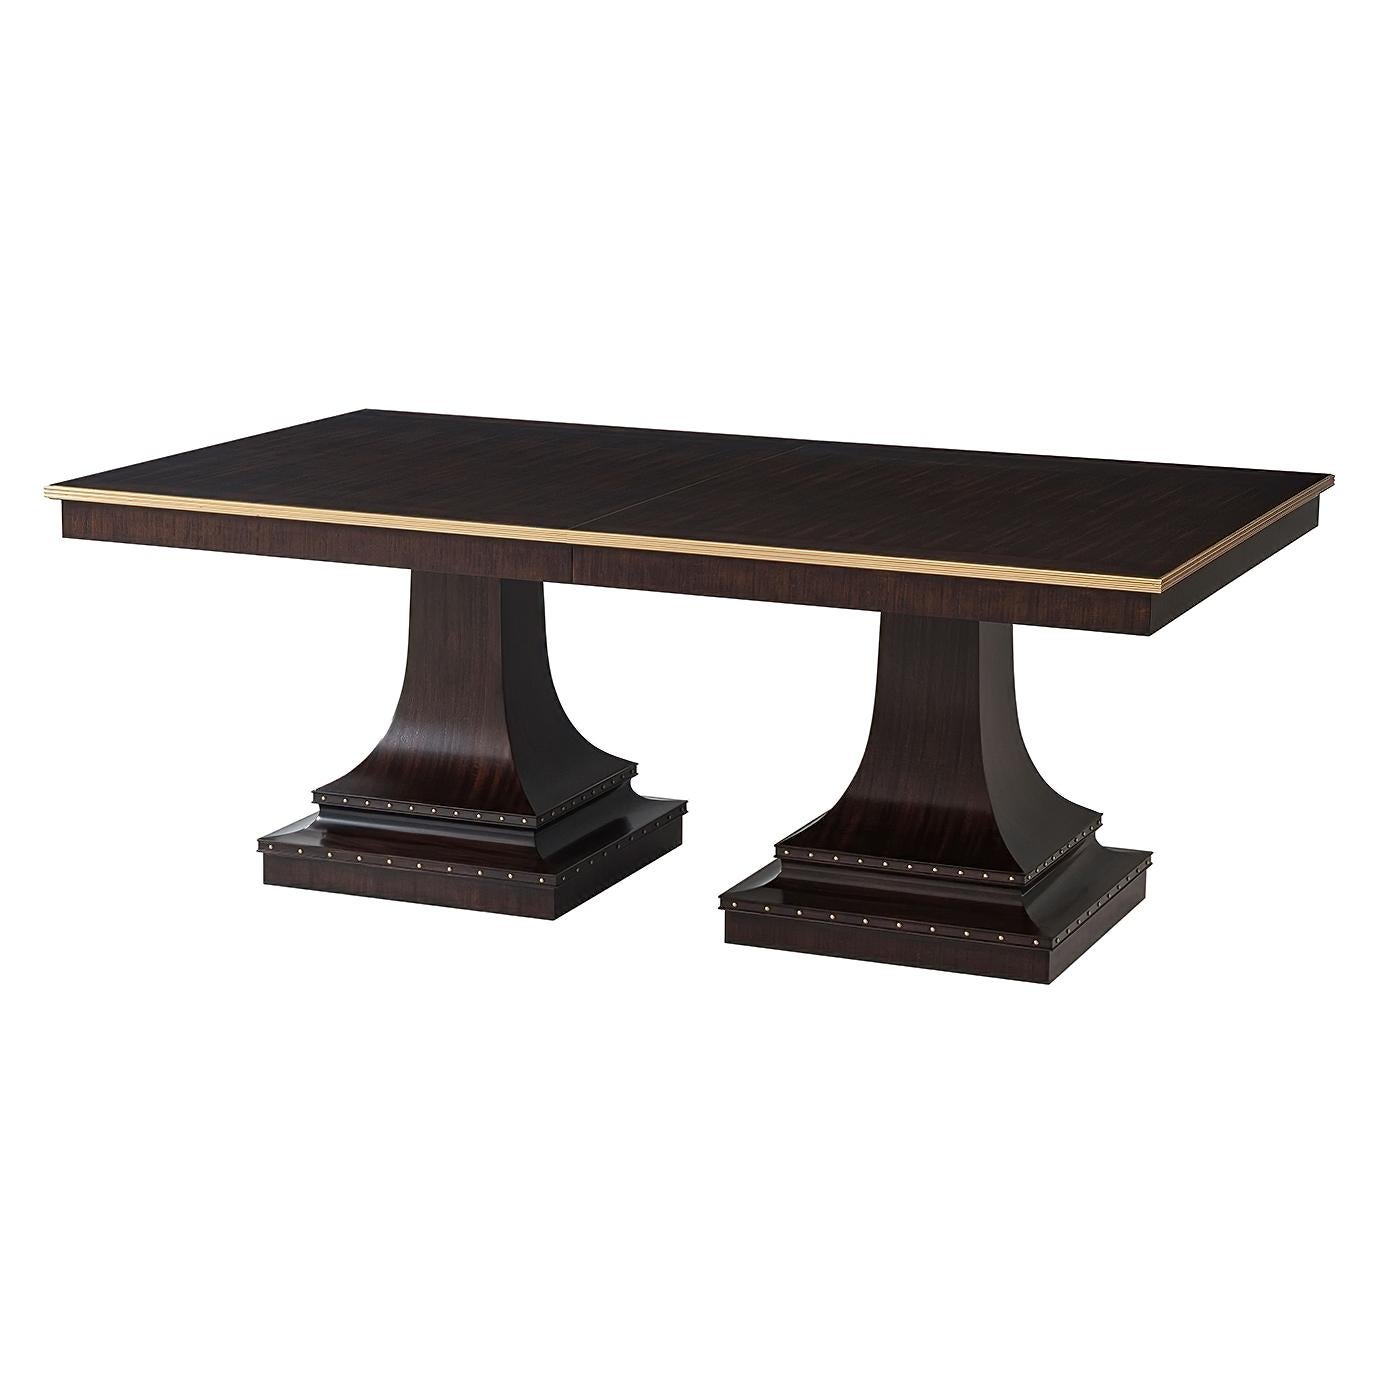 A modern Italian classically inspired dining table. The extendable dining tabletop in Mahogany veneer is detailed with a Brass reeded edge. Two down-swept and tapered monolithic pedestals form the molded base, decorated with brass nailhead trim – a